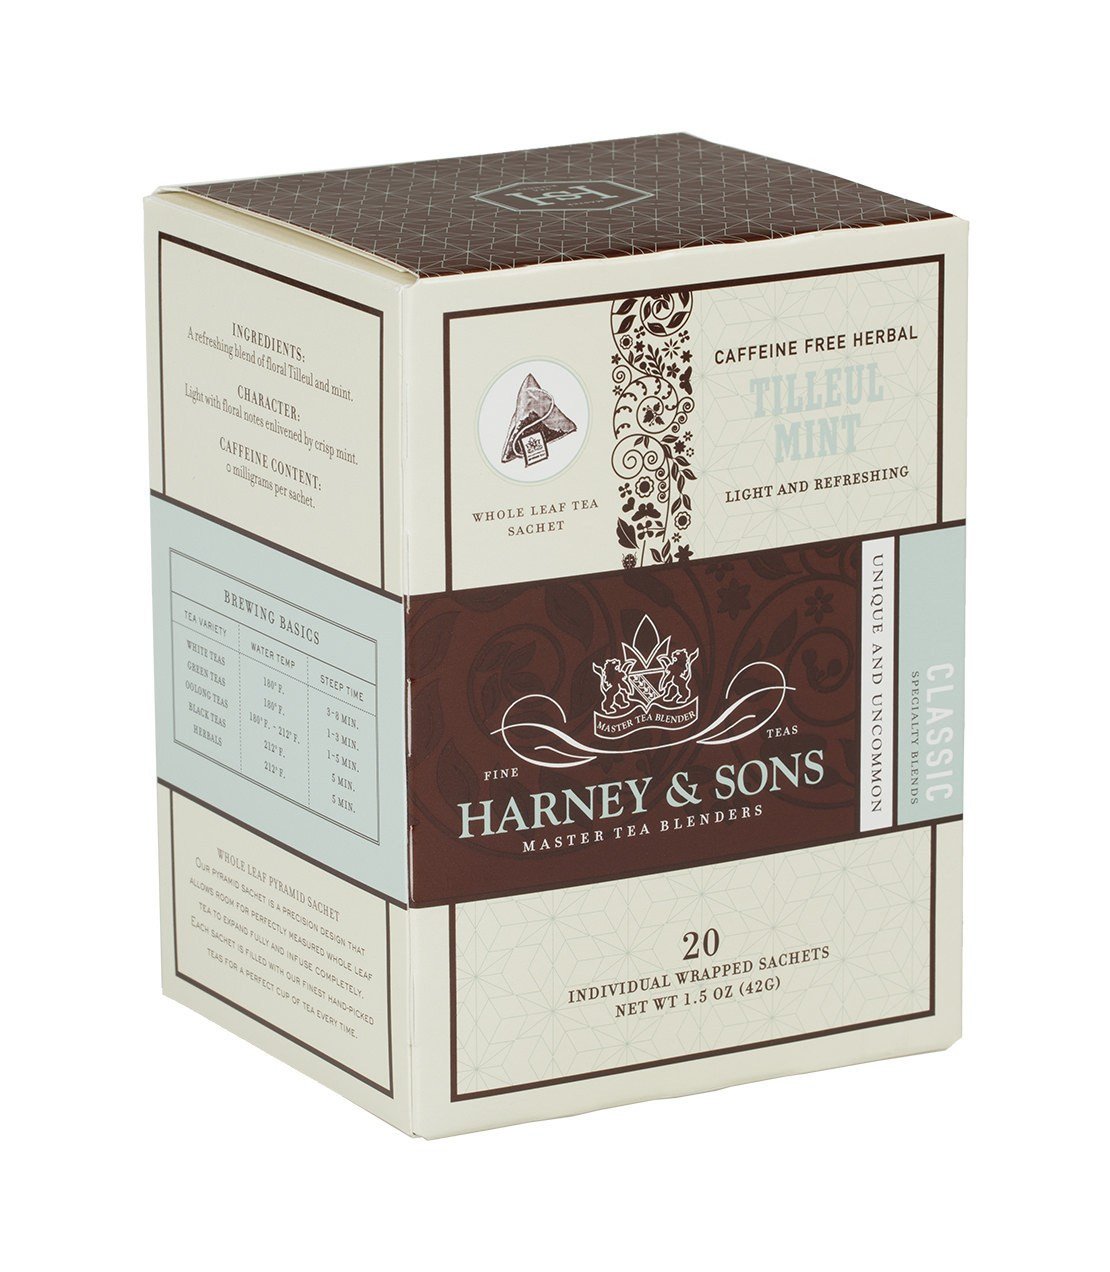 Tilleul Mint, Box of 20 Individually Wrapped Sachets -   - Harney & Sons Fine Teas